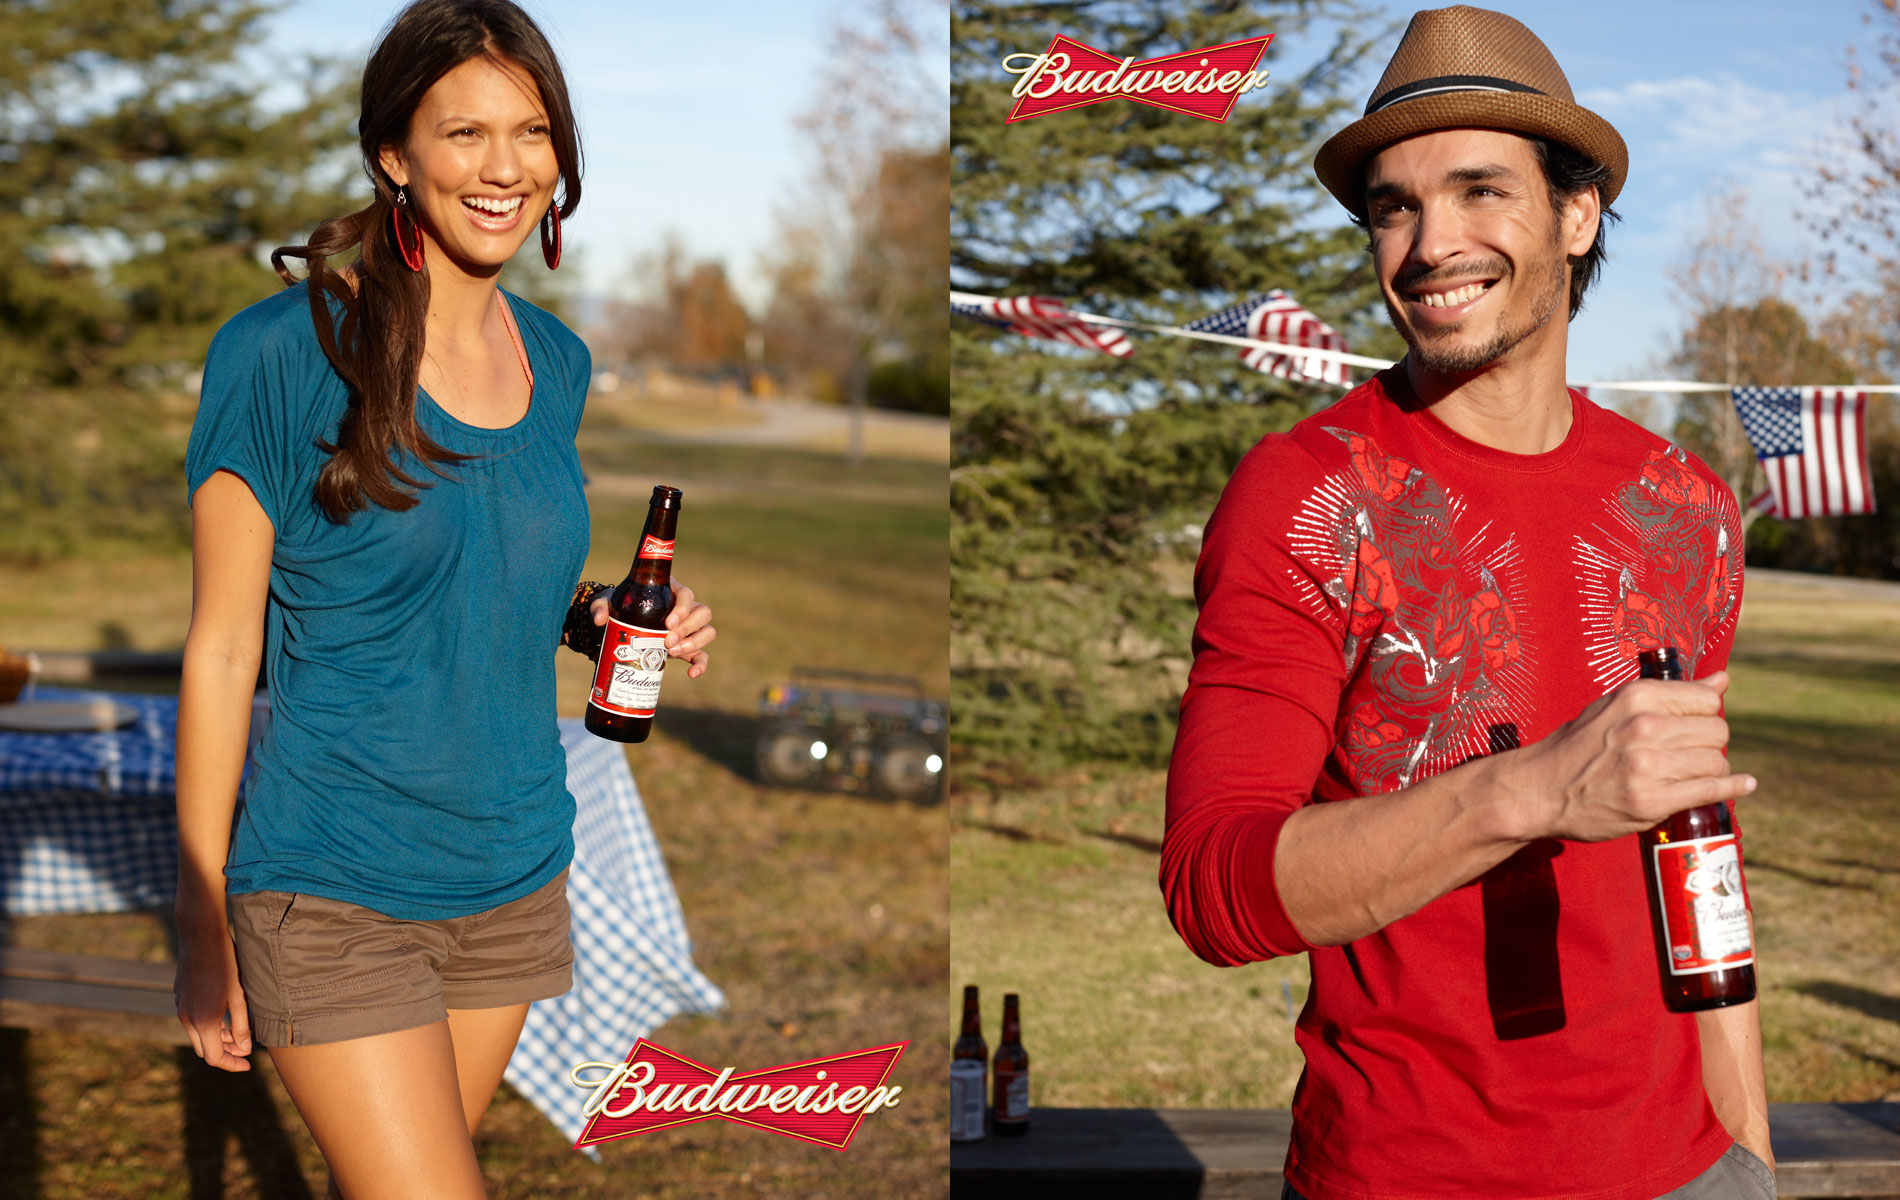 COMMISSIONS_BUDWEISER_010